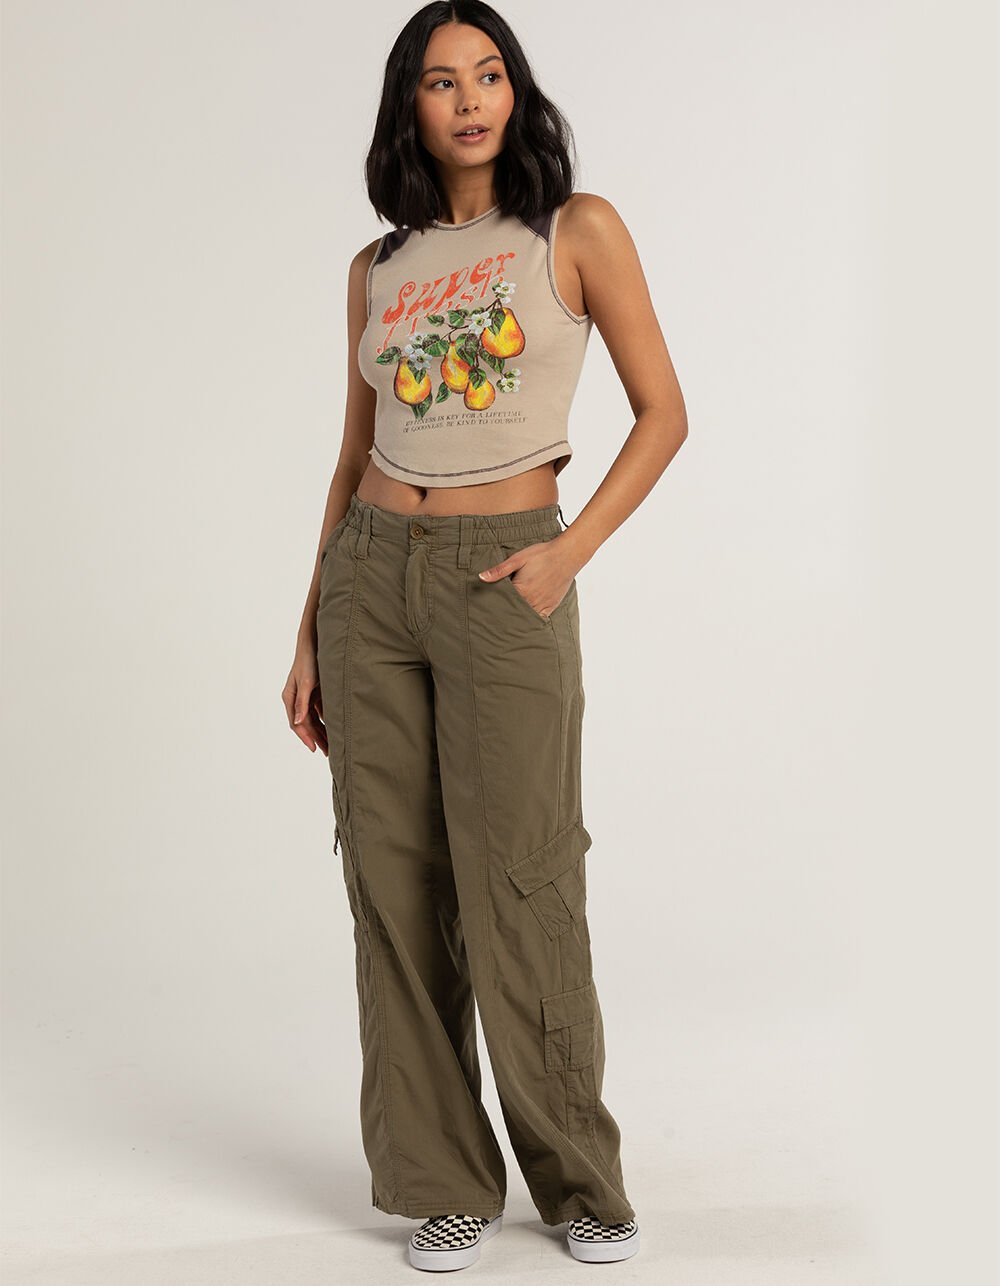 BDG Y2K LowRise Cargo Pants  White S at Urban Outfitters  Compare   Trinity Leeds